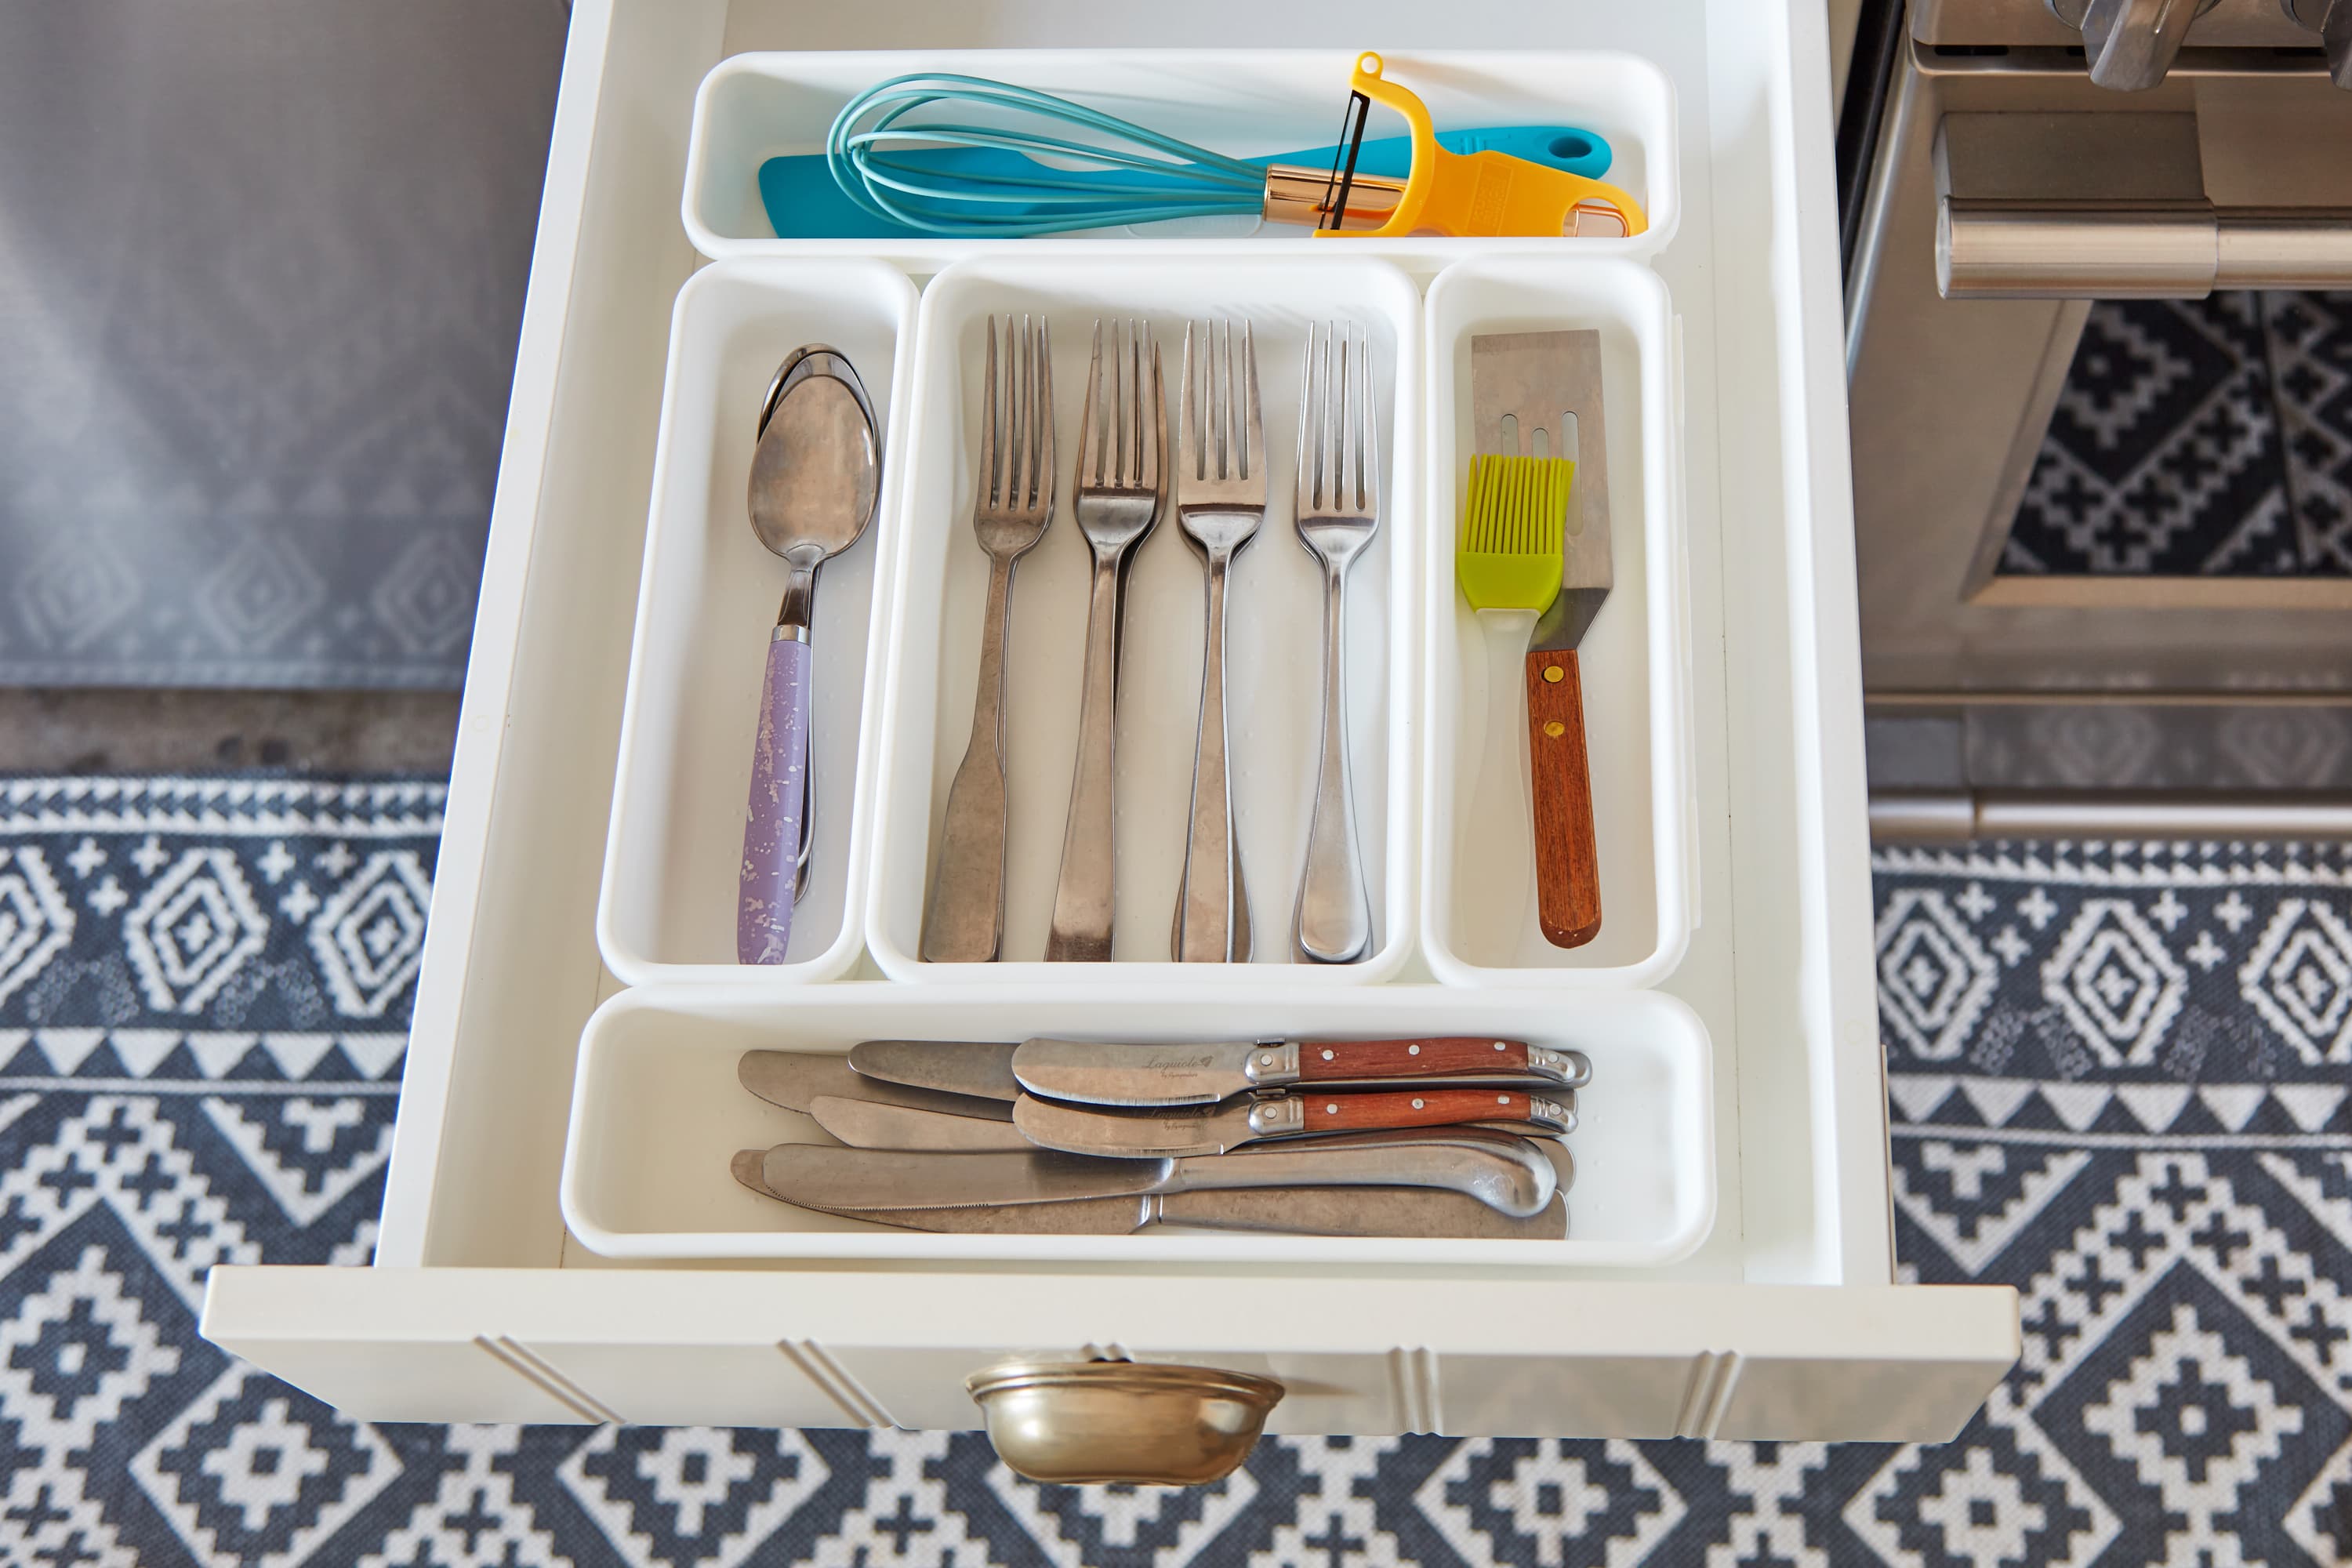 10 Tips to get More Kitchen Counter Space — The Family Handyman